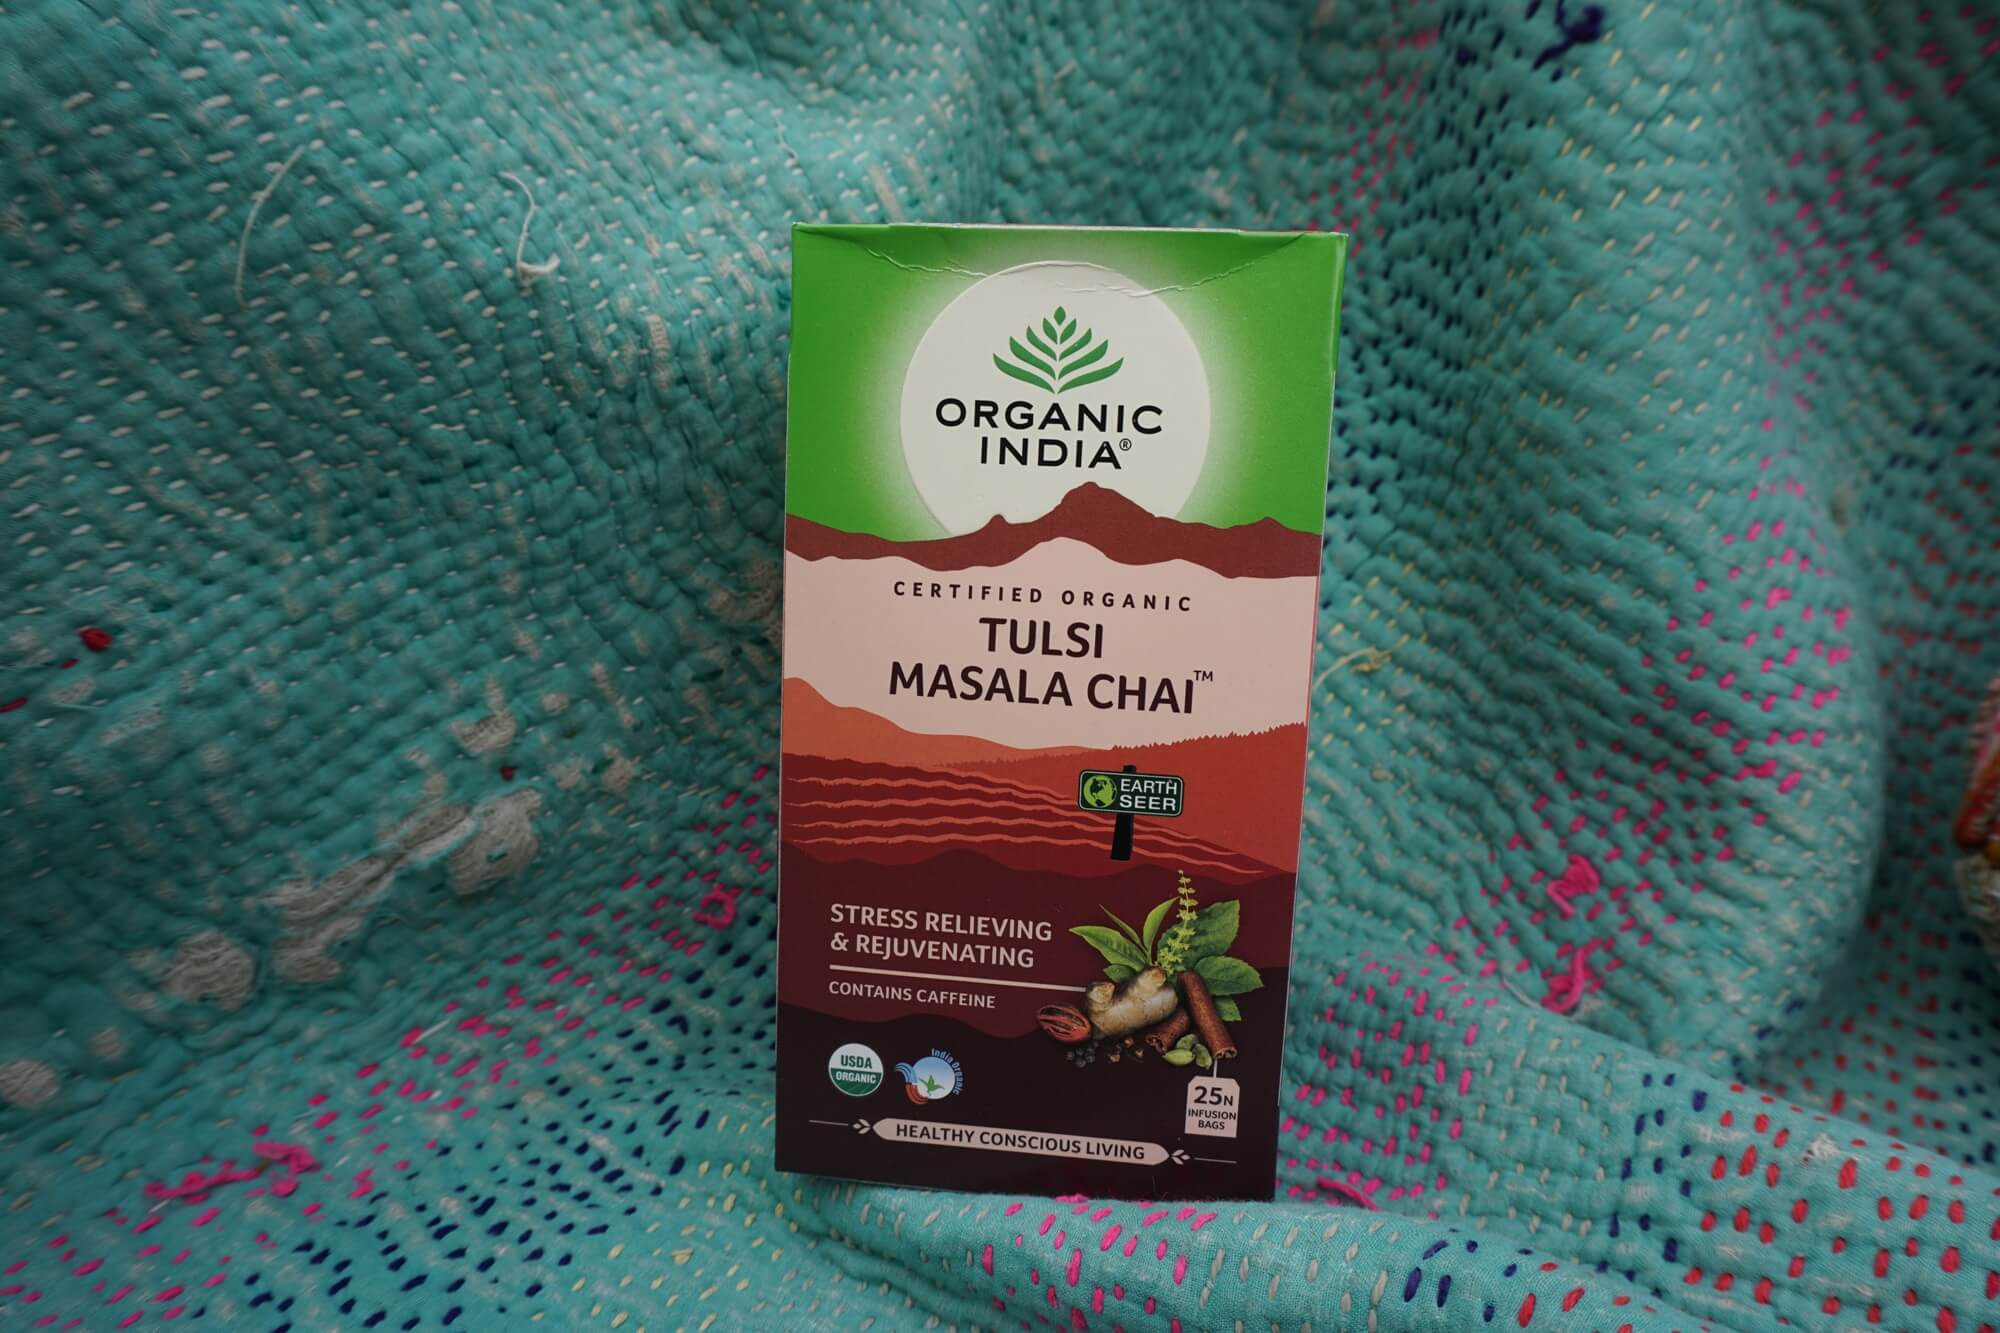 Best ayurvedic souvenirs in India from Organic India tea